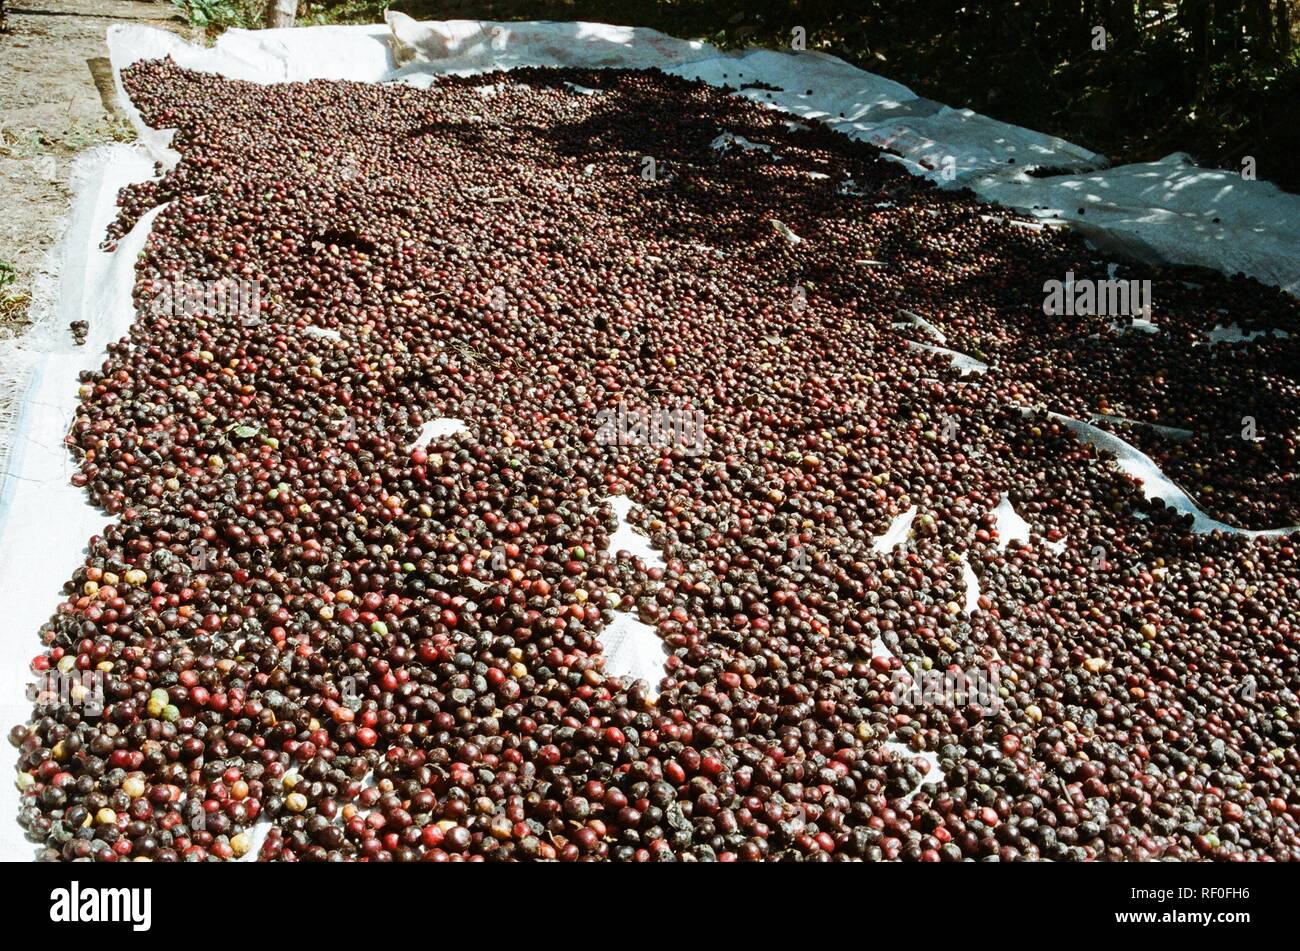 Black Pepper drying in the sun in Kerala, Southern India. Stock Photo